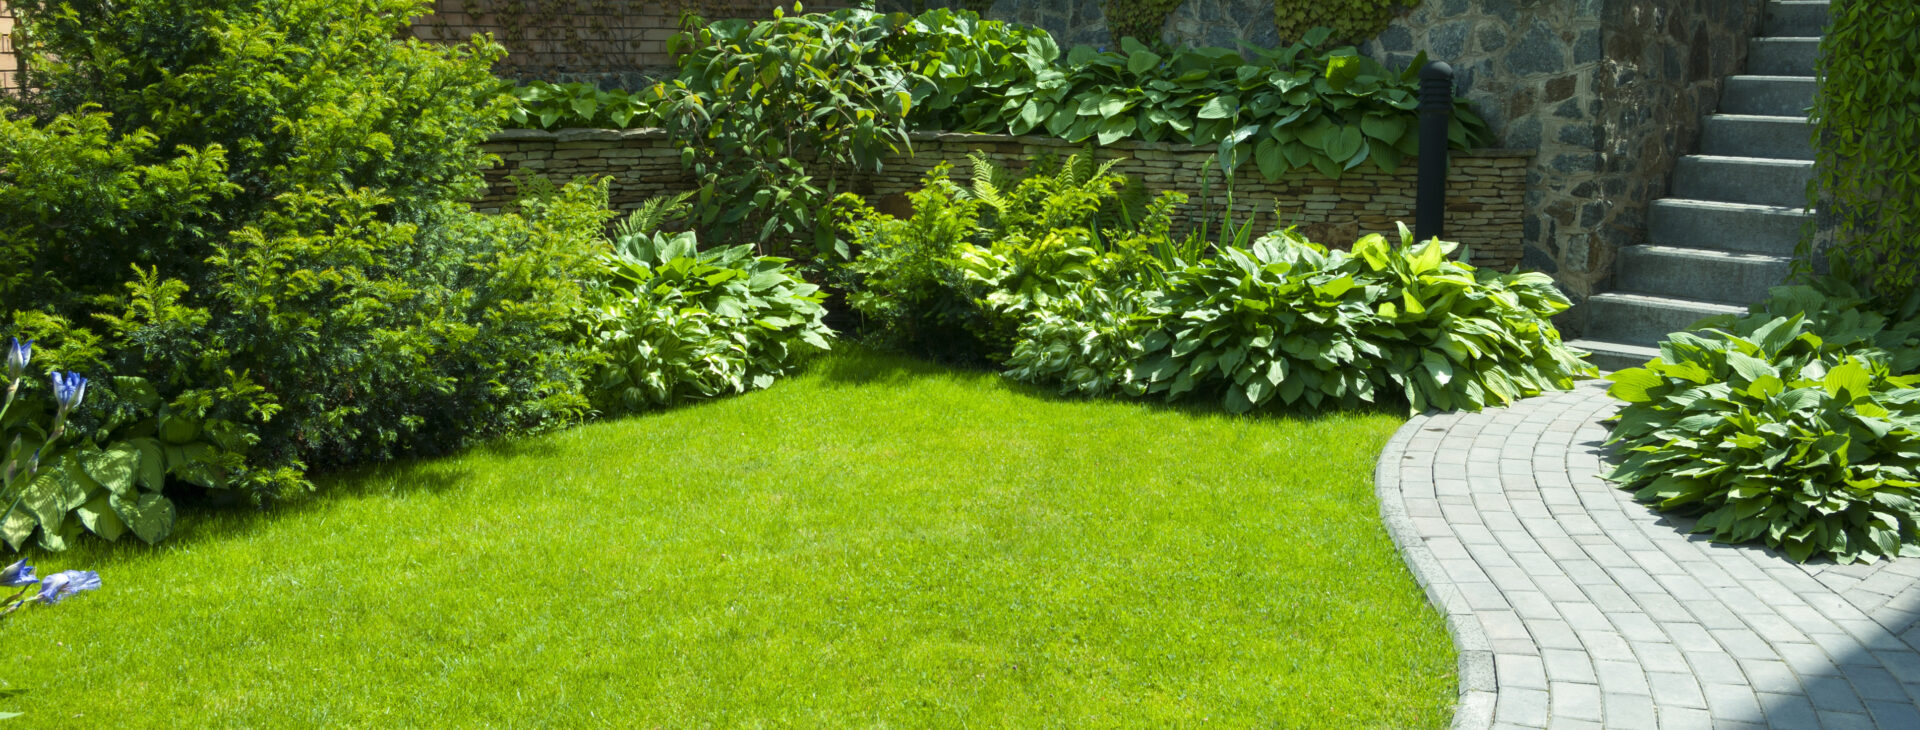 Your lawn and landscaping
the way you want it.